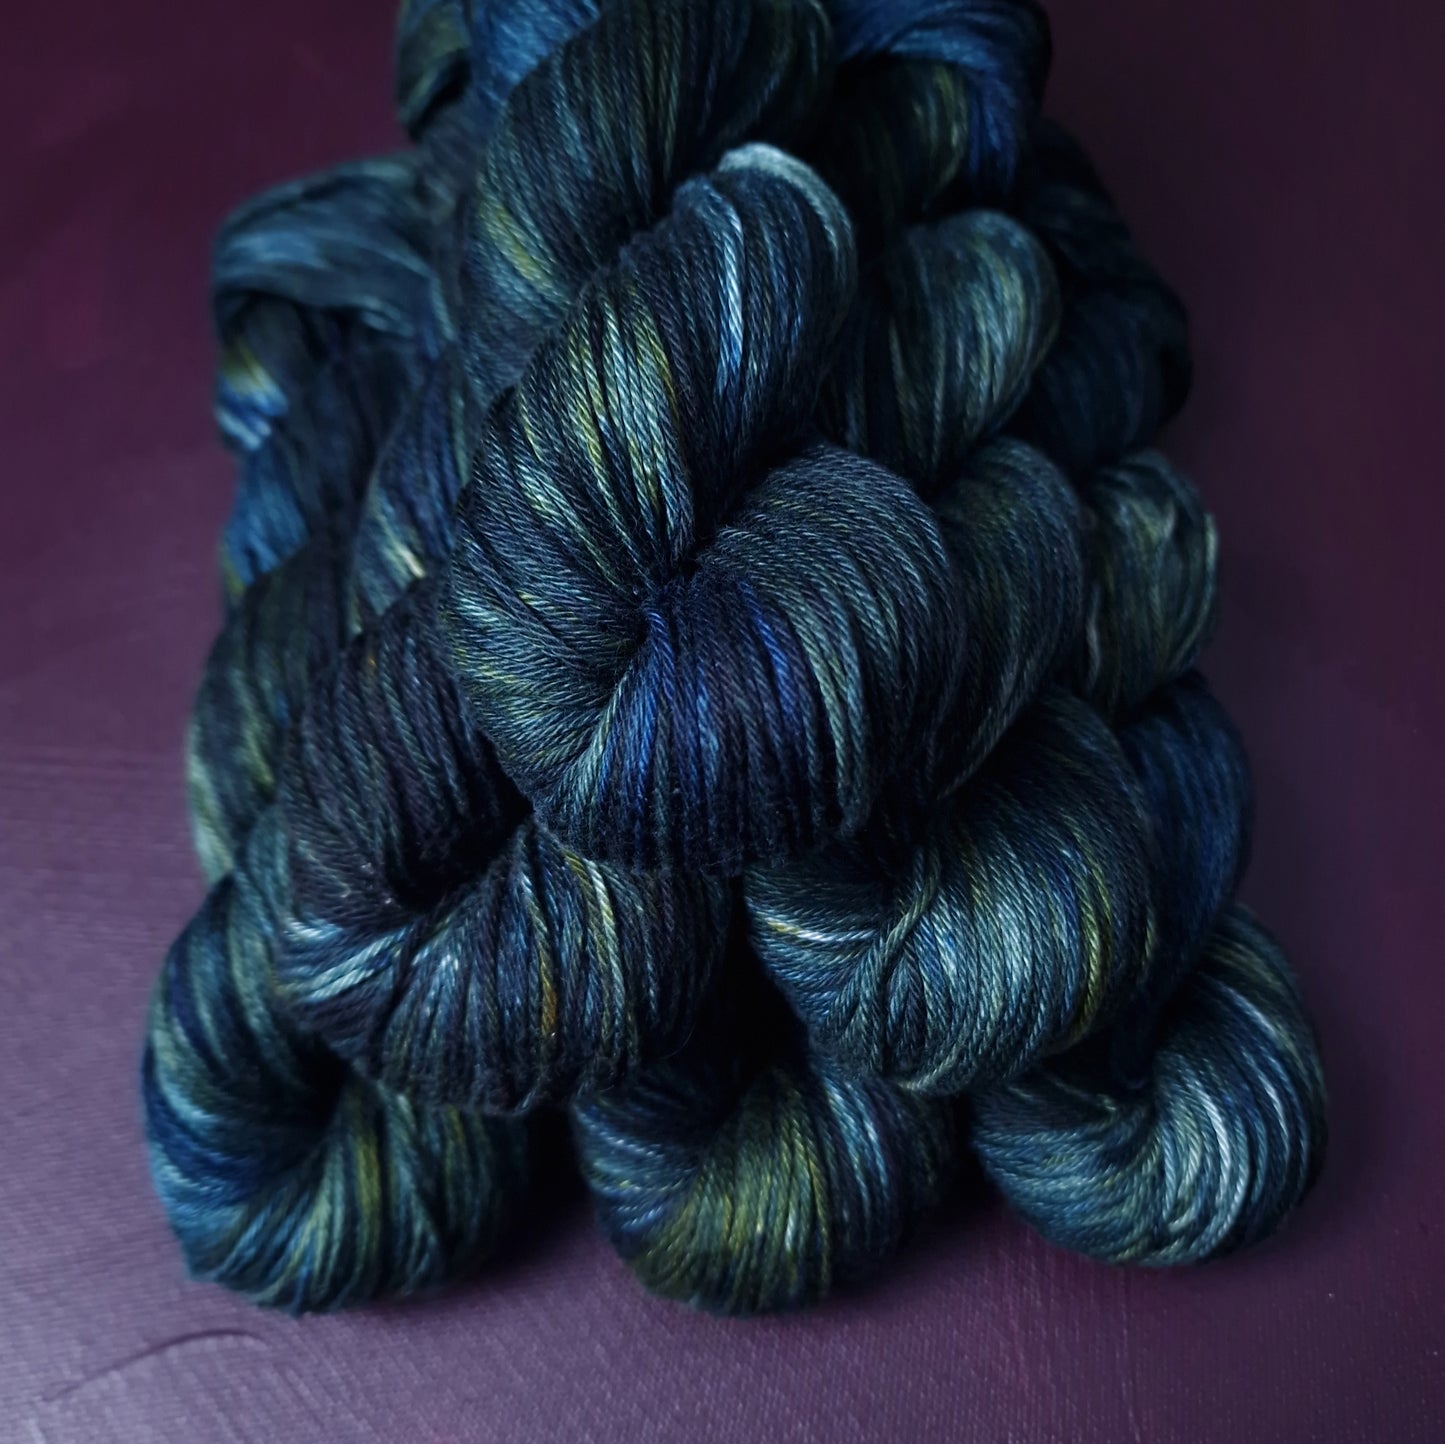 Hand dyed yarn ~ Starry Night ~ mercerized cotton yarn, vegan, hand painted, indie dyed